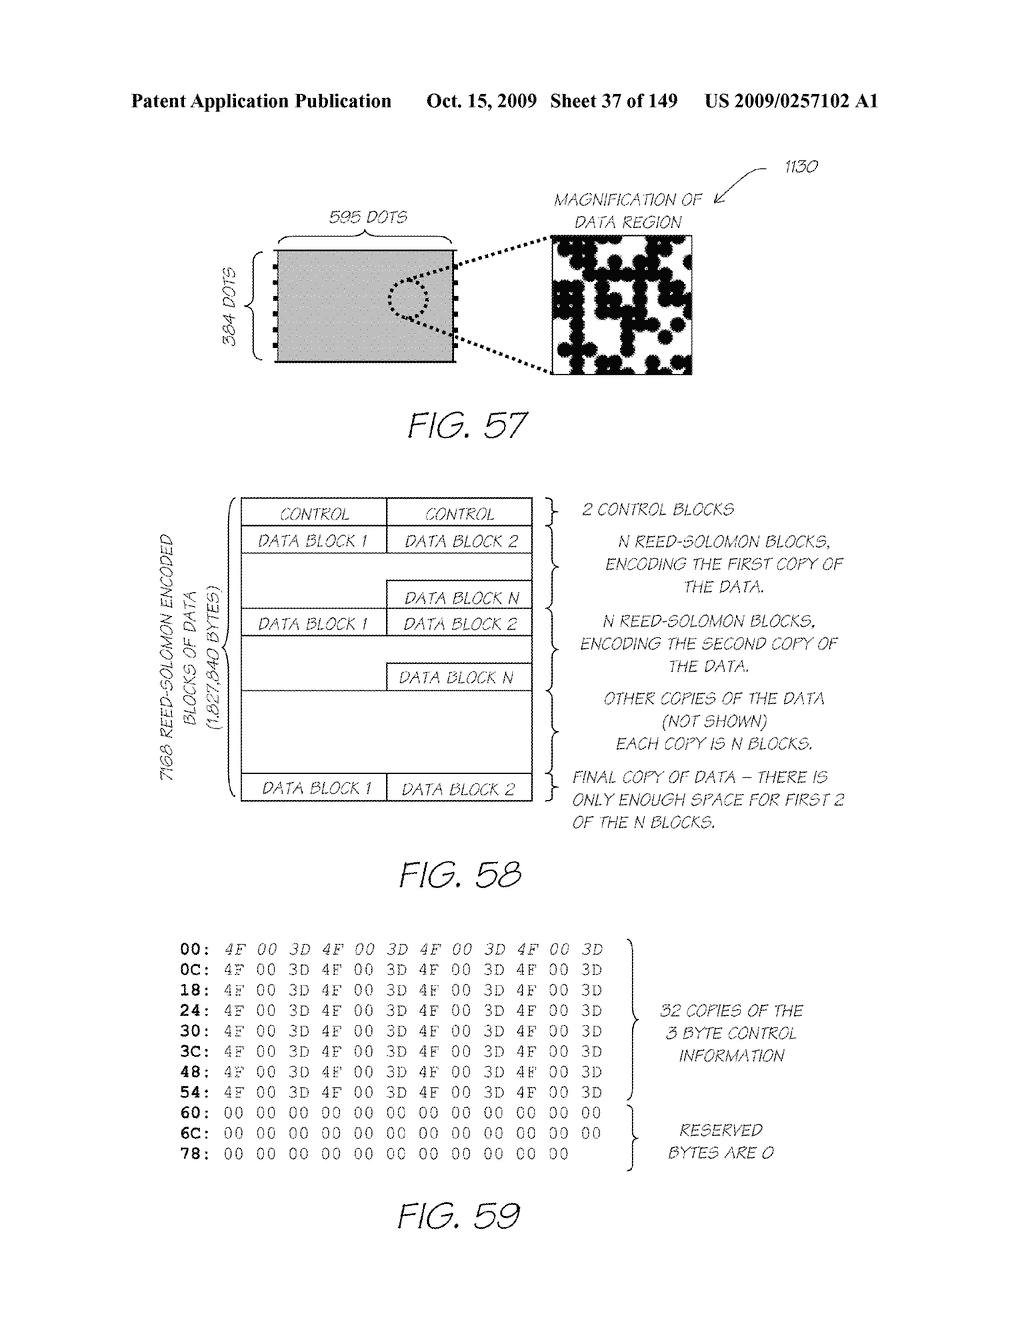 IMAGE PROCESSING APPARATUS HAVING CARD READER FOR APPLYING EFFECTS STORED ON A CARD TO A STORED IMAGE - diagram, schematic, and image 38